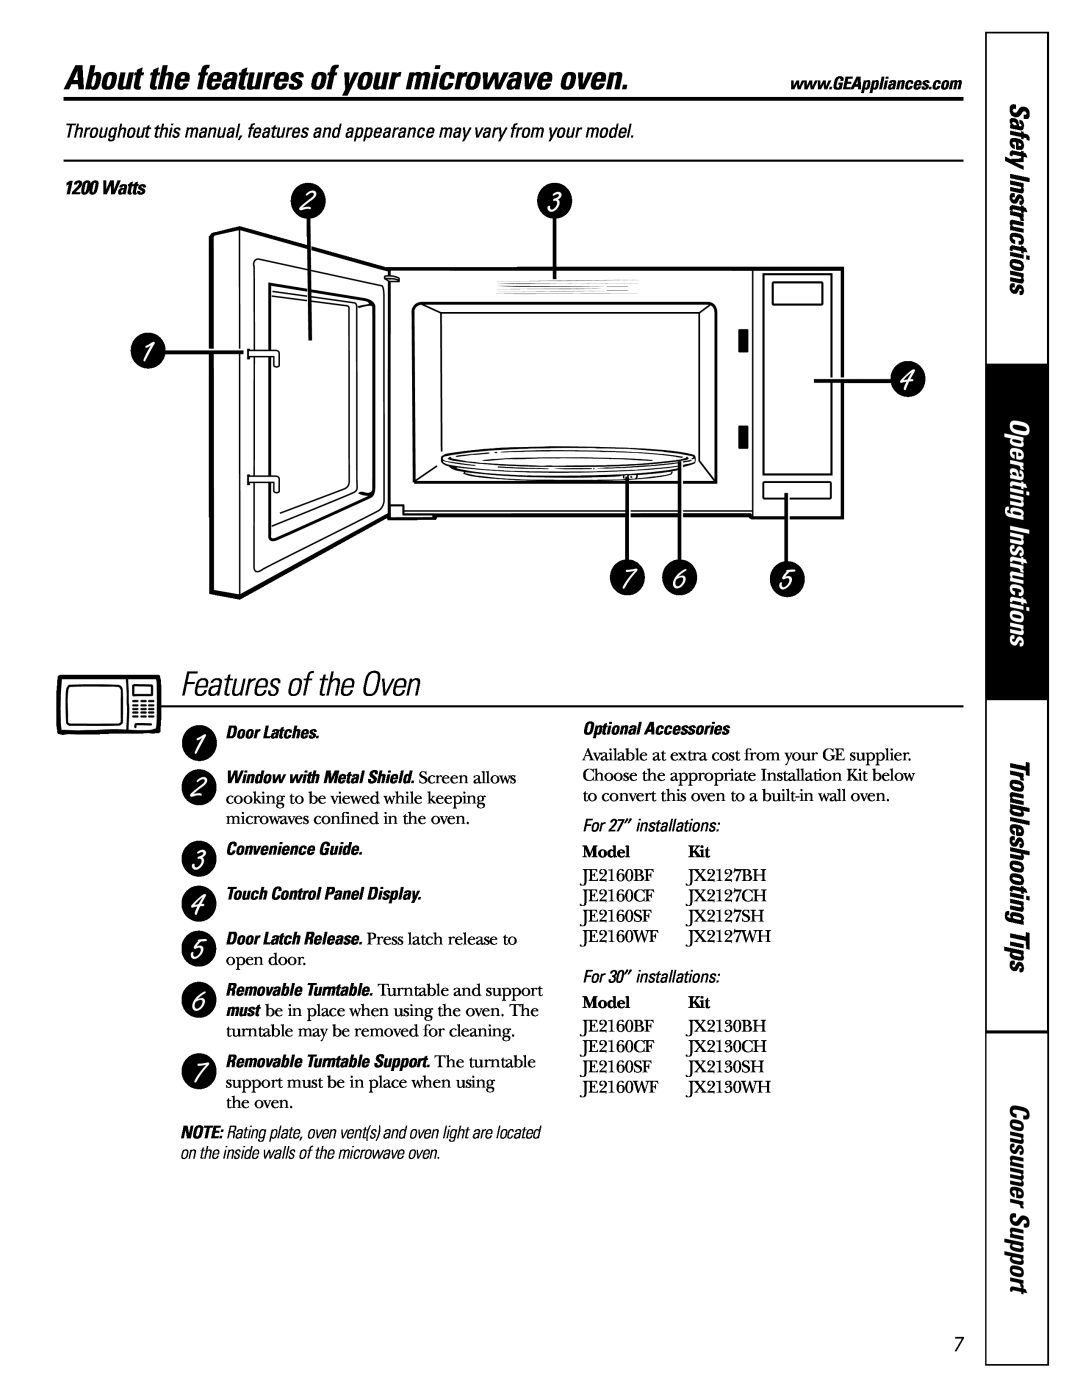 GE JE2160 About the features of your microwave oven, Features of the Oven, Safety Instructions, Operating Instructions 